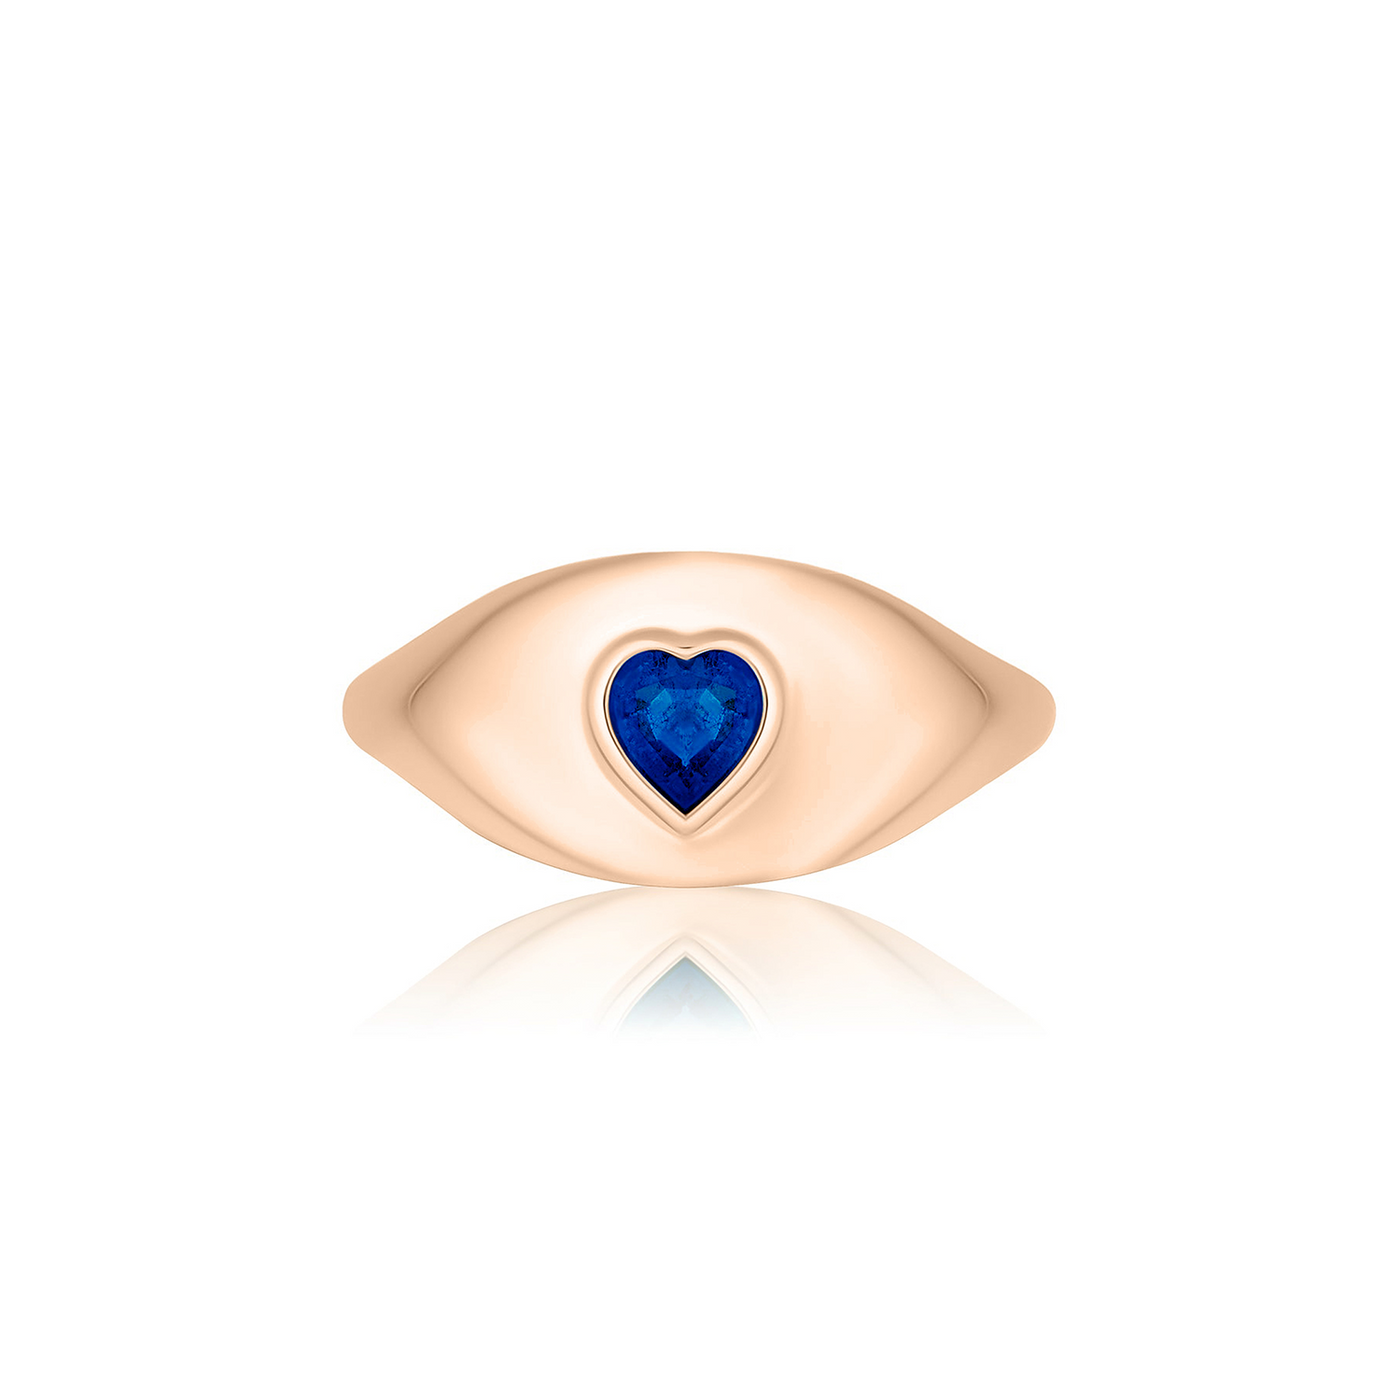 Small Heart Signet Ring